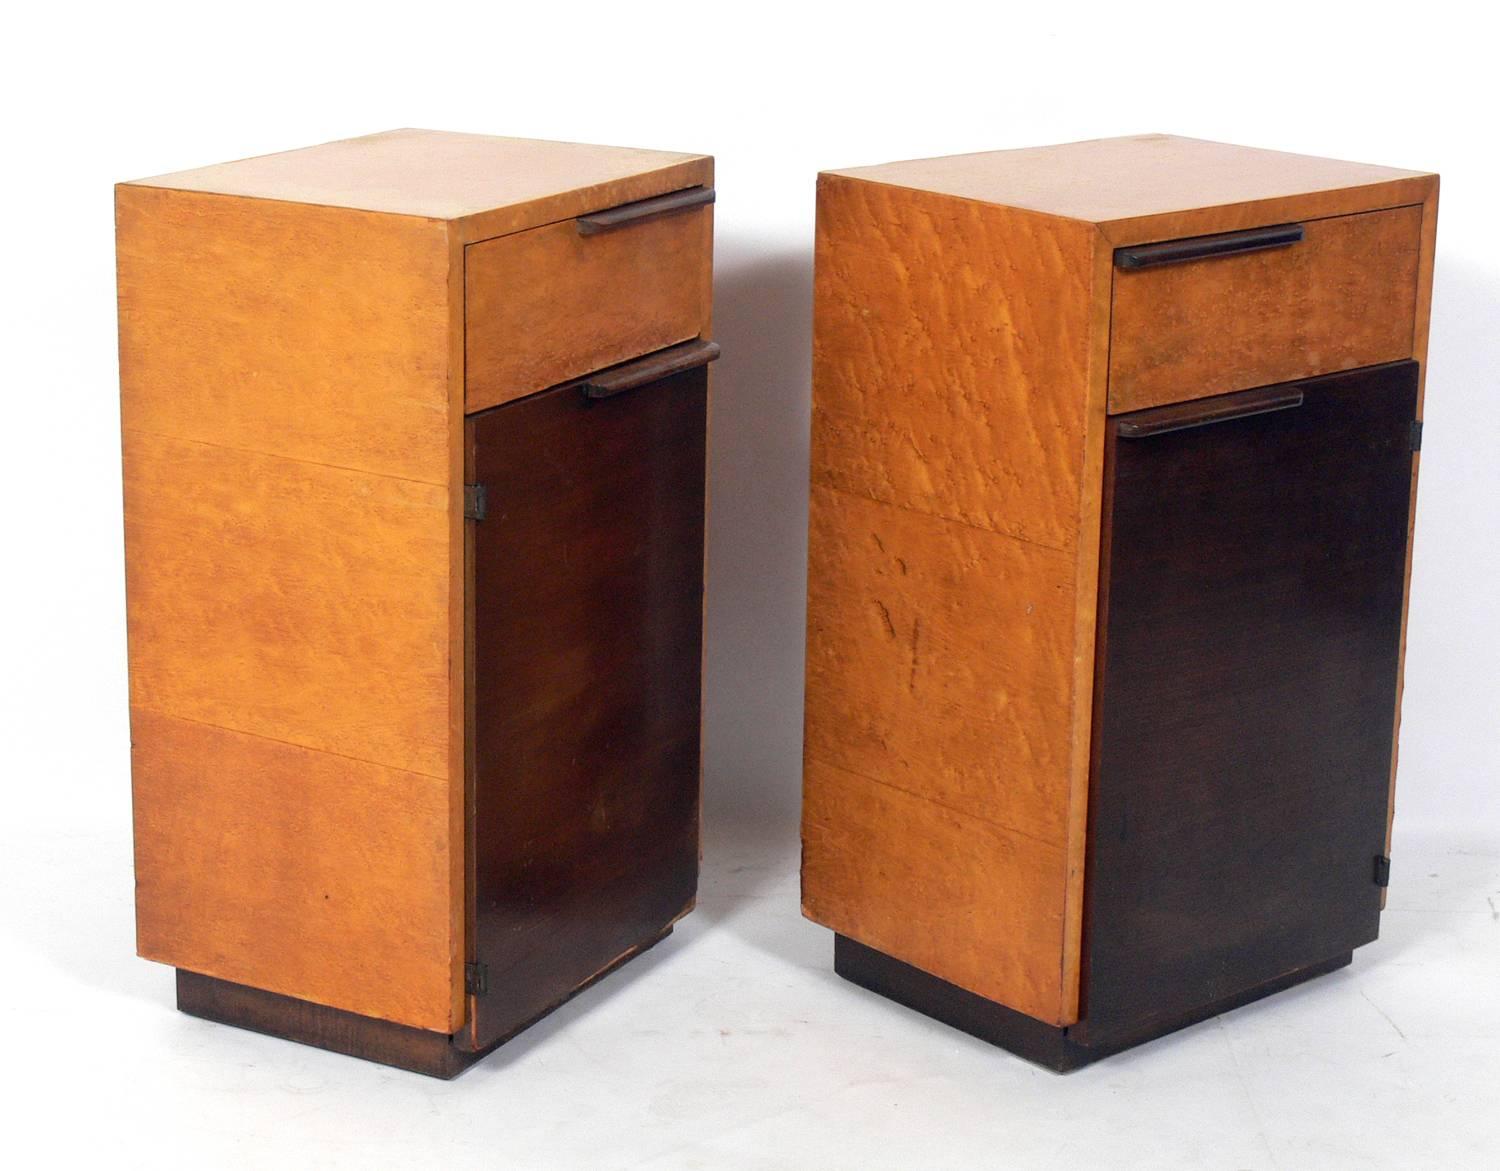 Pair of Art Deco nightstands, designed by Gilbert Rohde for Herman Miller, American, circa 1930s. They are a versatile size and can be used as nightstands, or as side or end tables. They are currently being refinished. The price noted below includes